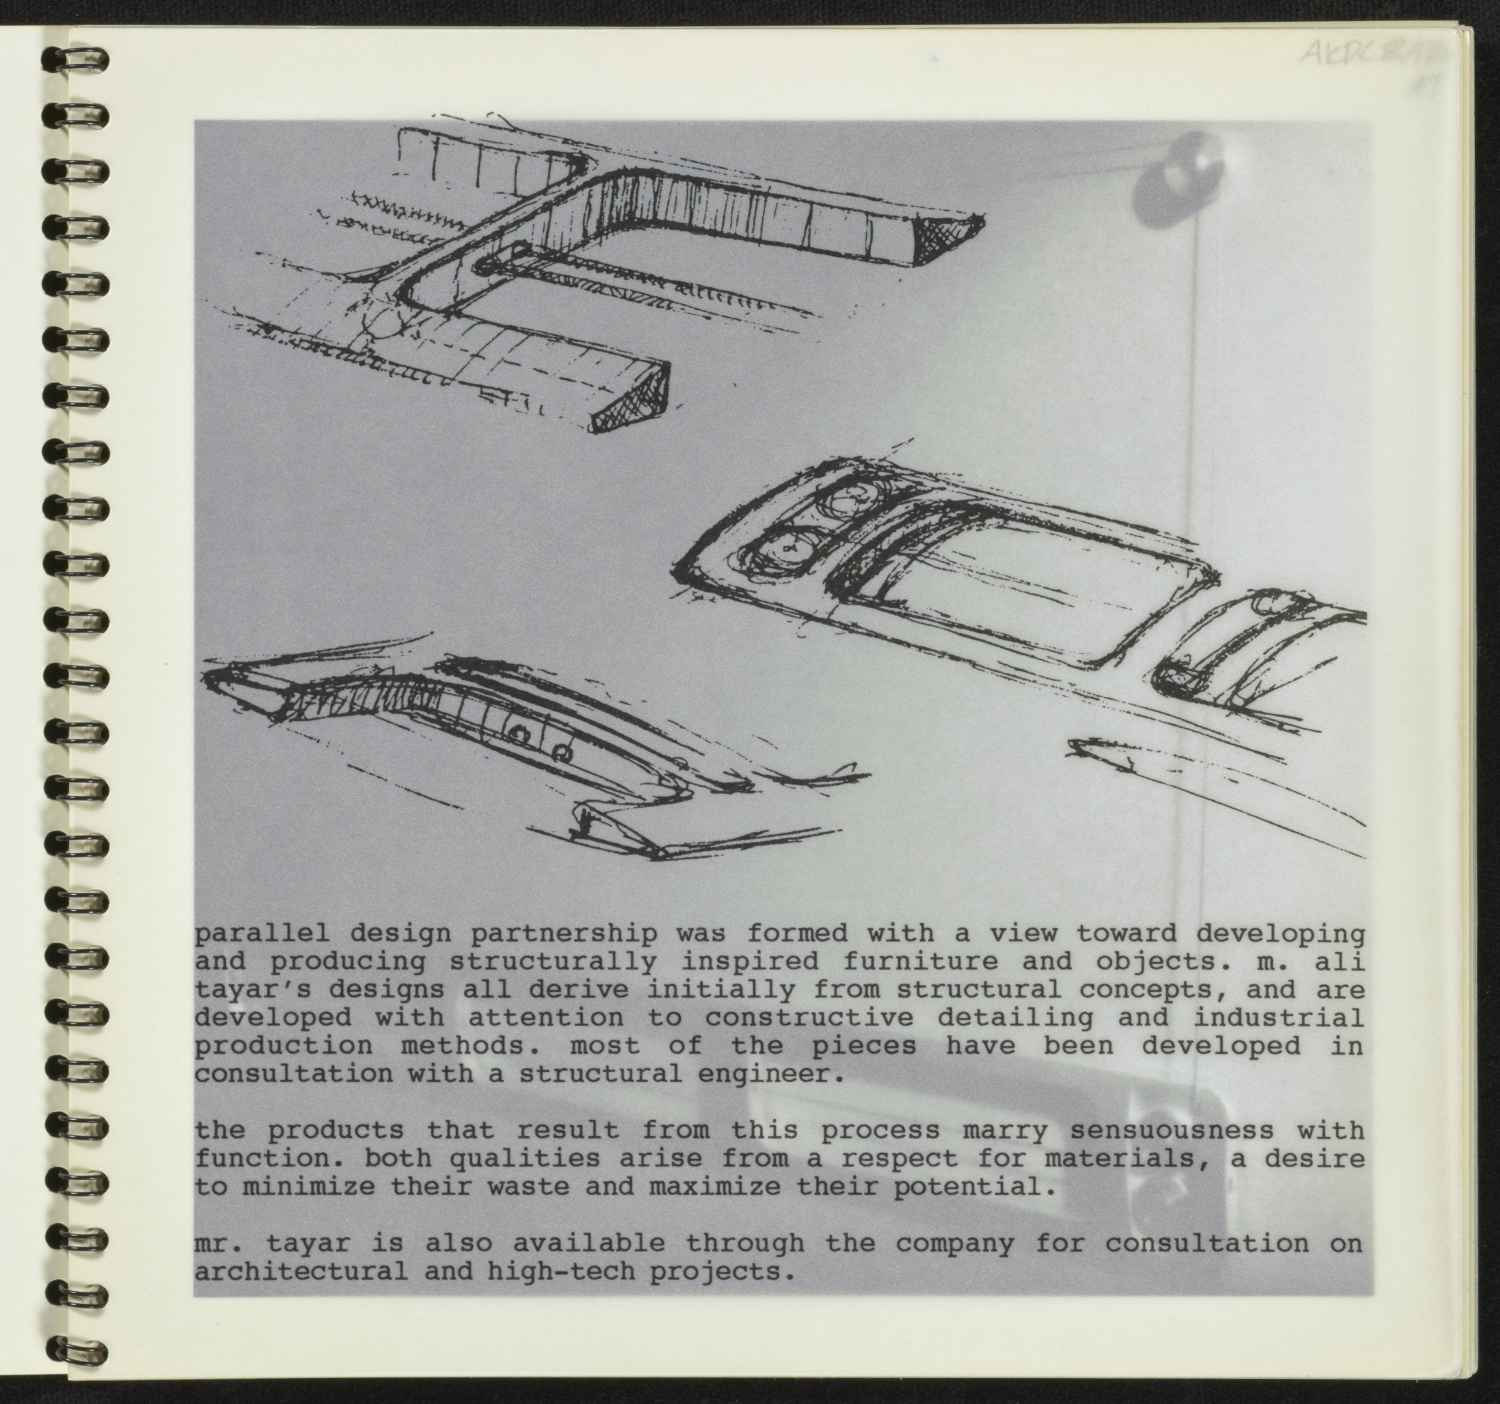 Parallel Design  - A catalogue detailing various furniture and object designs produced by Ali Tayar and Parallel Design Partnership through approximately 1995. Included in the booklet are "Niloo's Table" (1994), the "Hawkeye Bracket" (1995), and "Nick's Trivet" (1994).